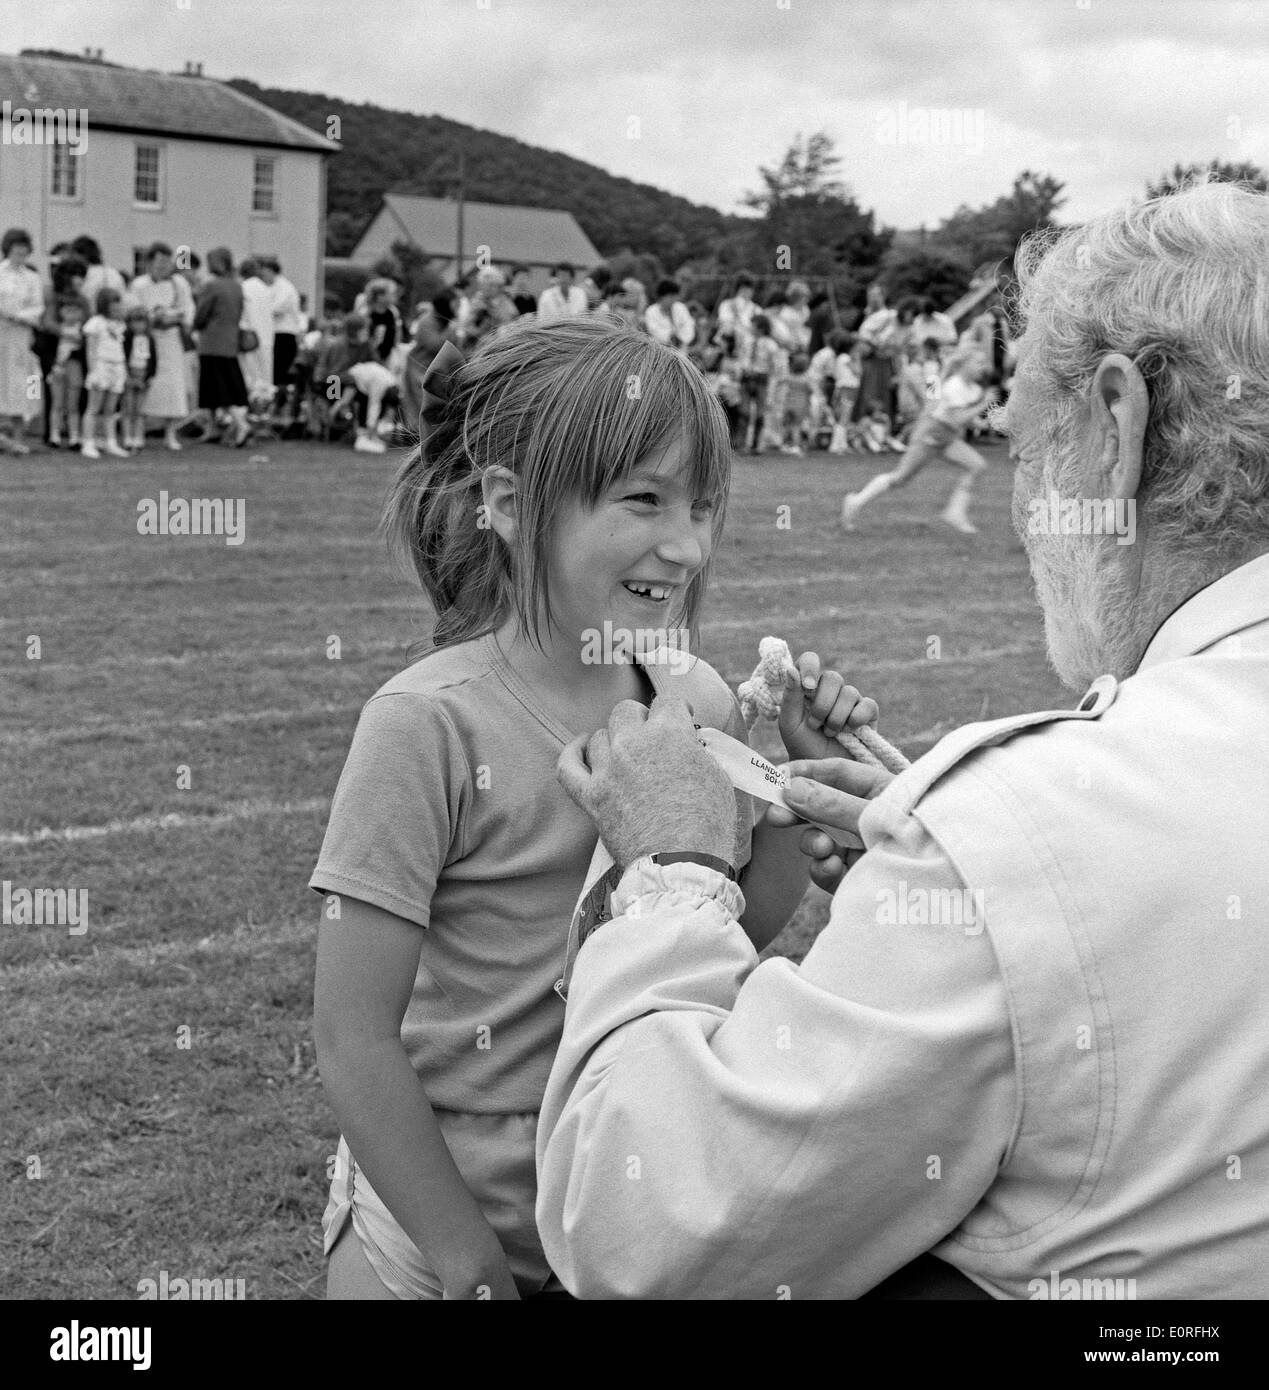 A judge pins a ribbon onto a girl's t shirt at primary school sports day in Llanwrda, Carmarthenshire Wales UK  KATHY DEWITT Stock Photo